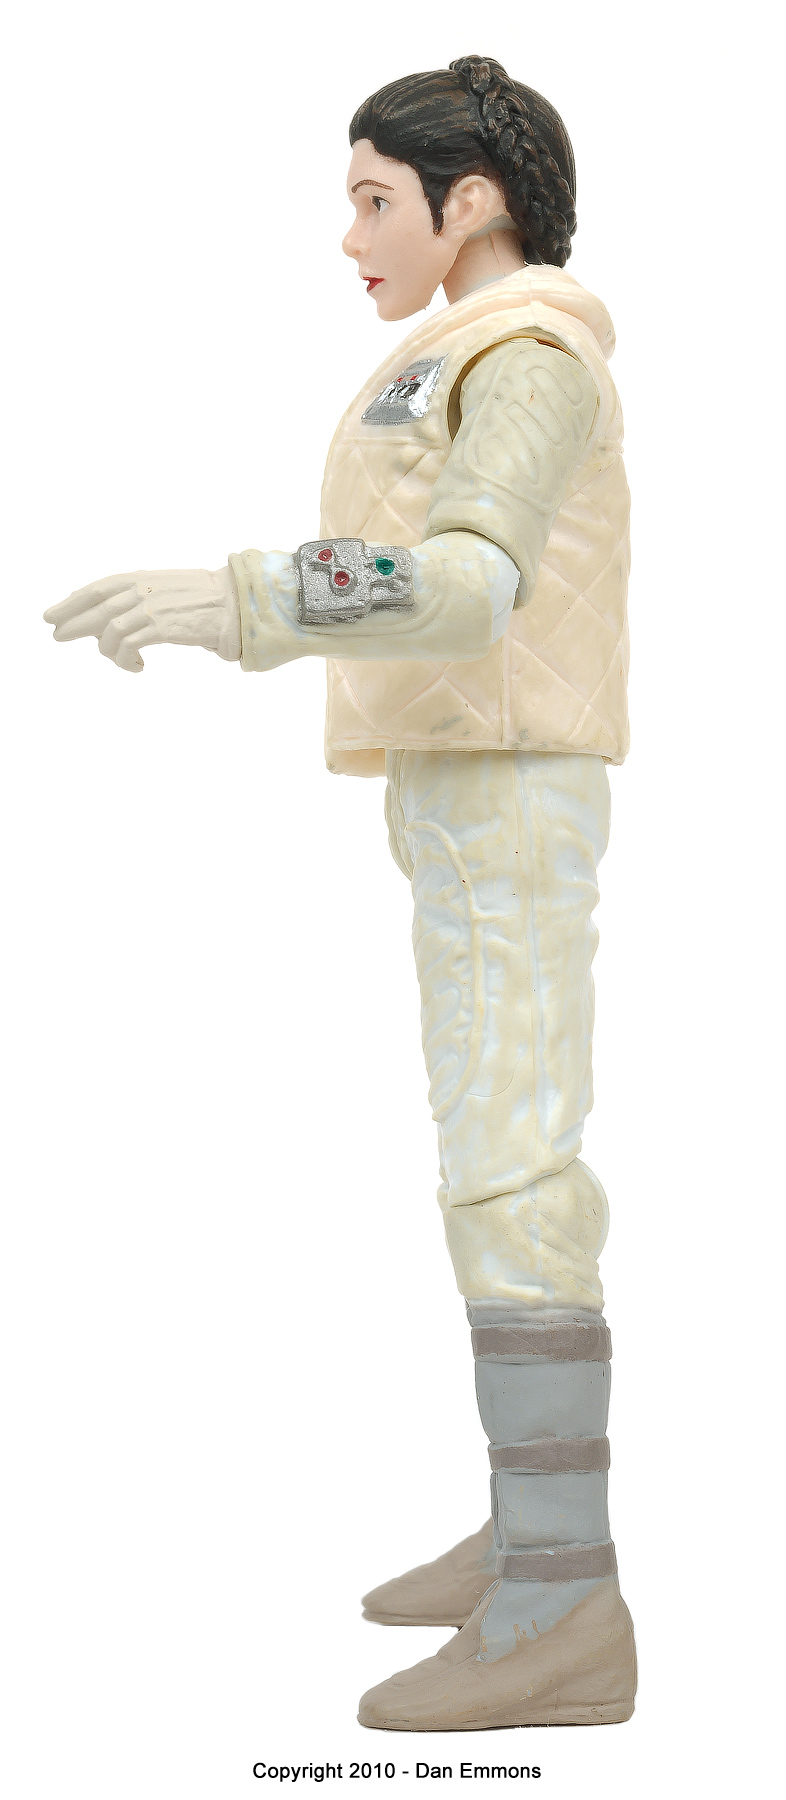 The Vintage Collection - VC02: Leia (Hoth Outfit)